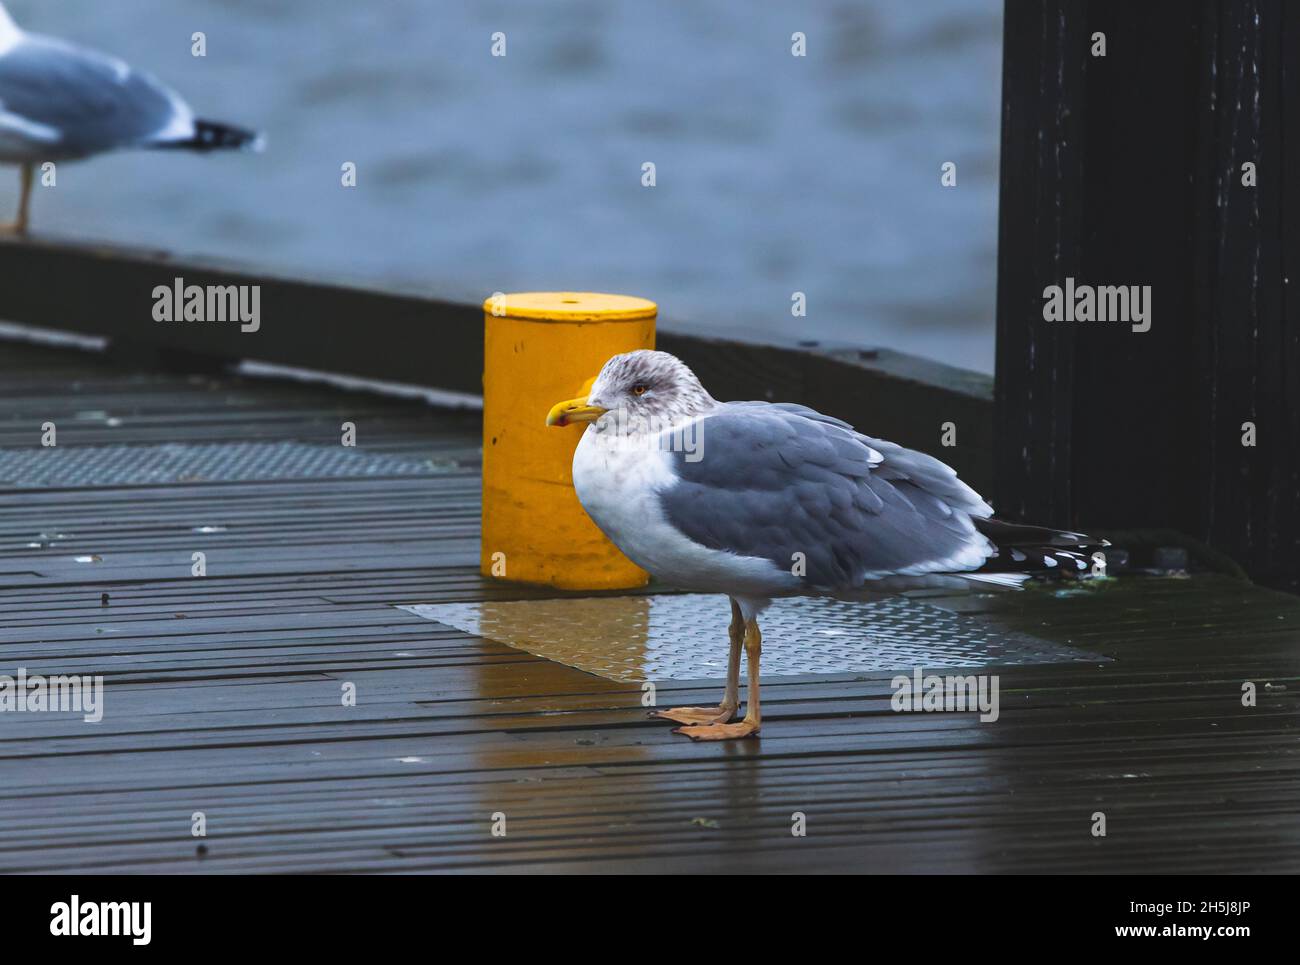 Young seagull on the pier, next to a yellow pole. Waiting for a fishing boat. Cloudy day, blue water in the background. Larus marinus. Stock Photo